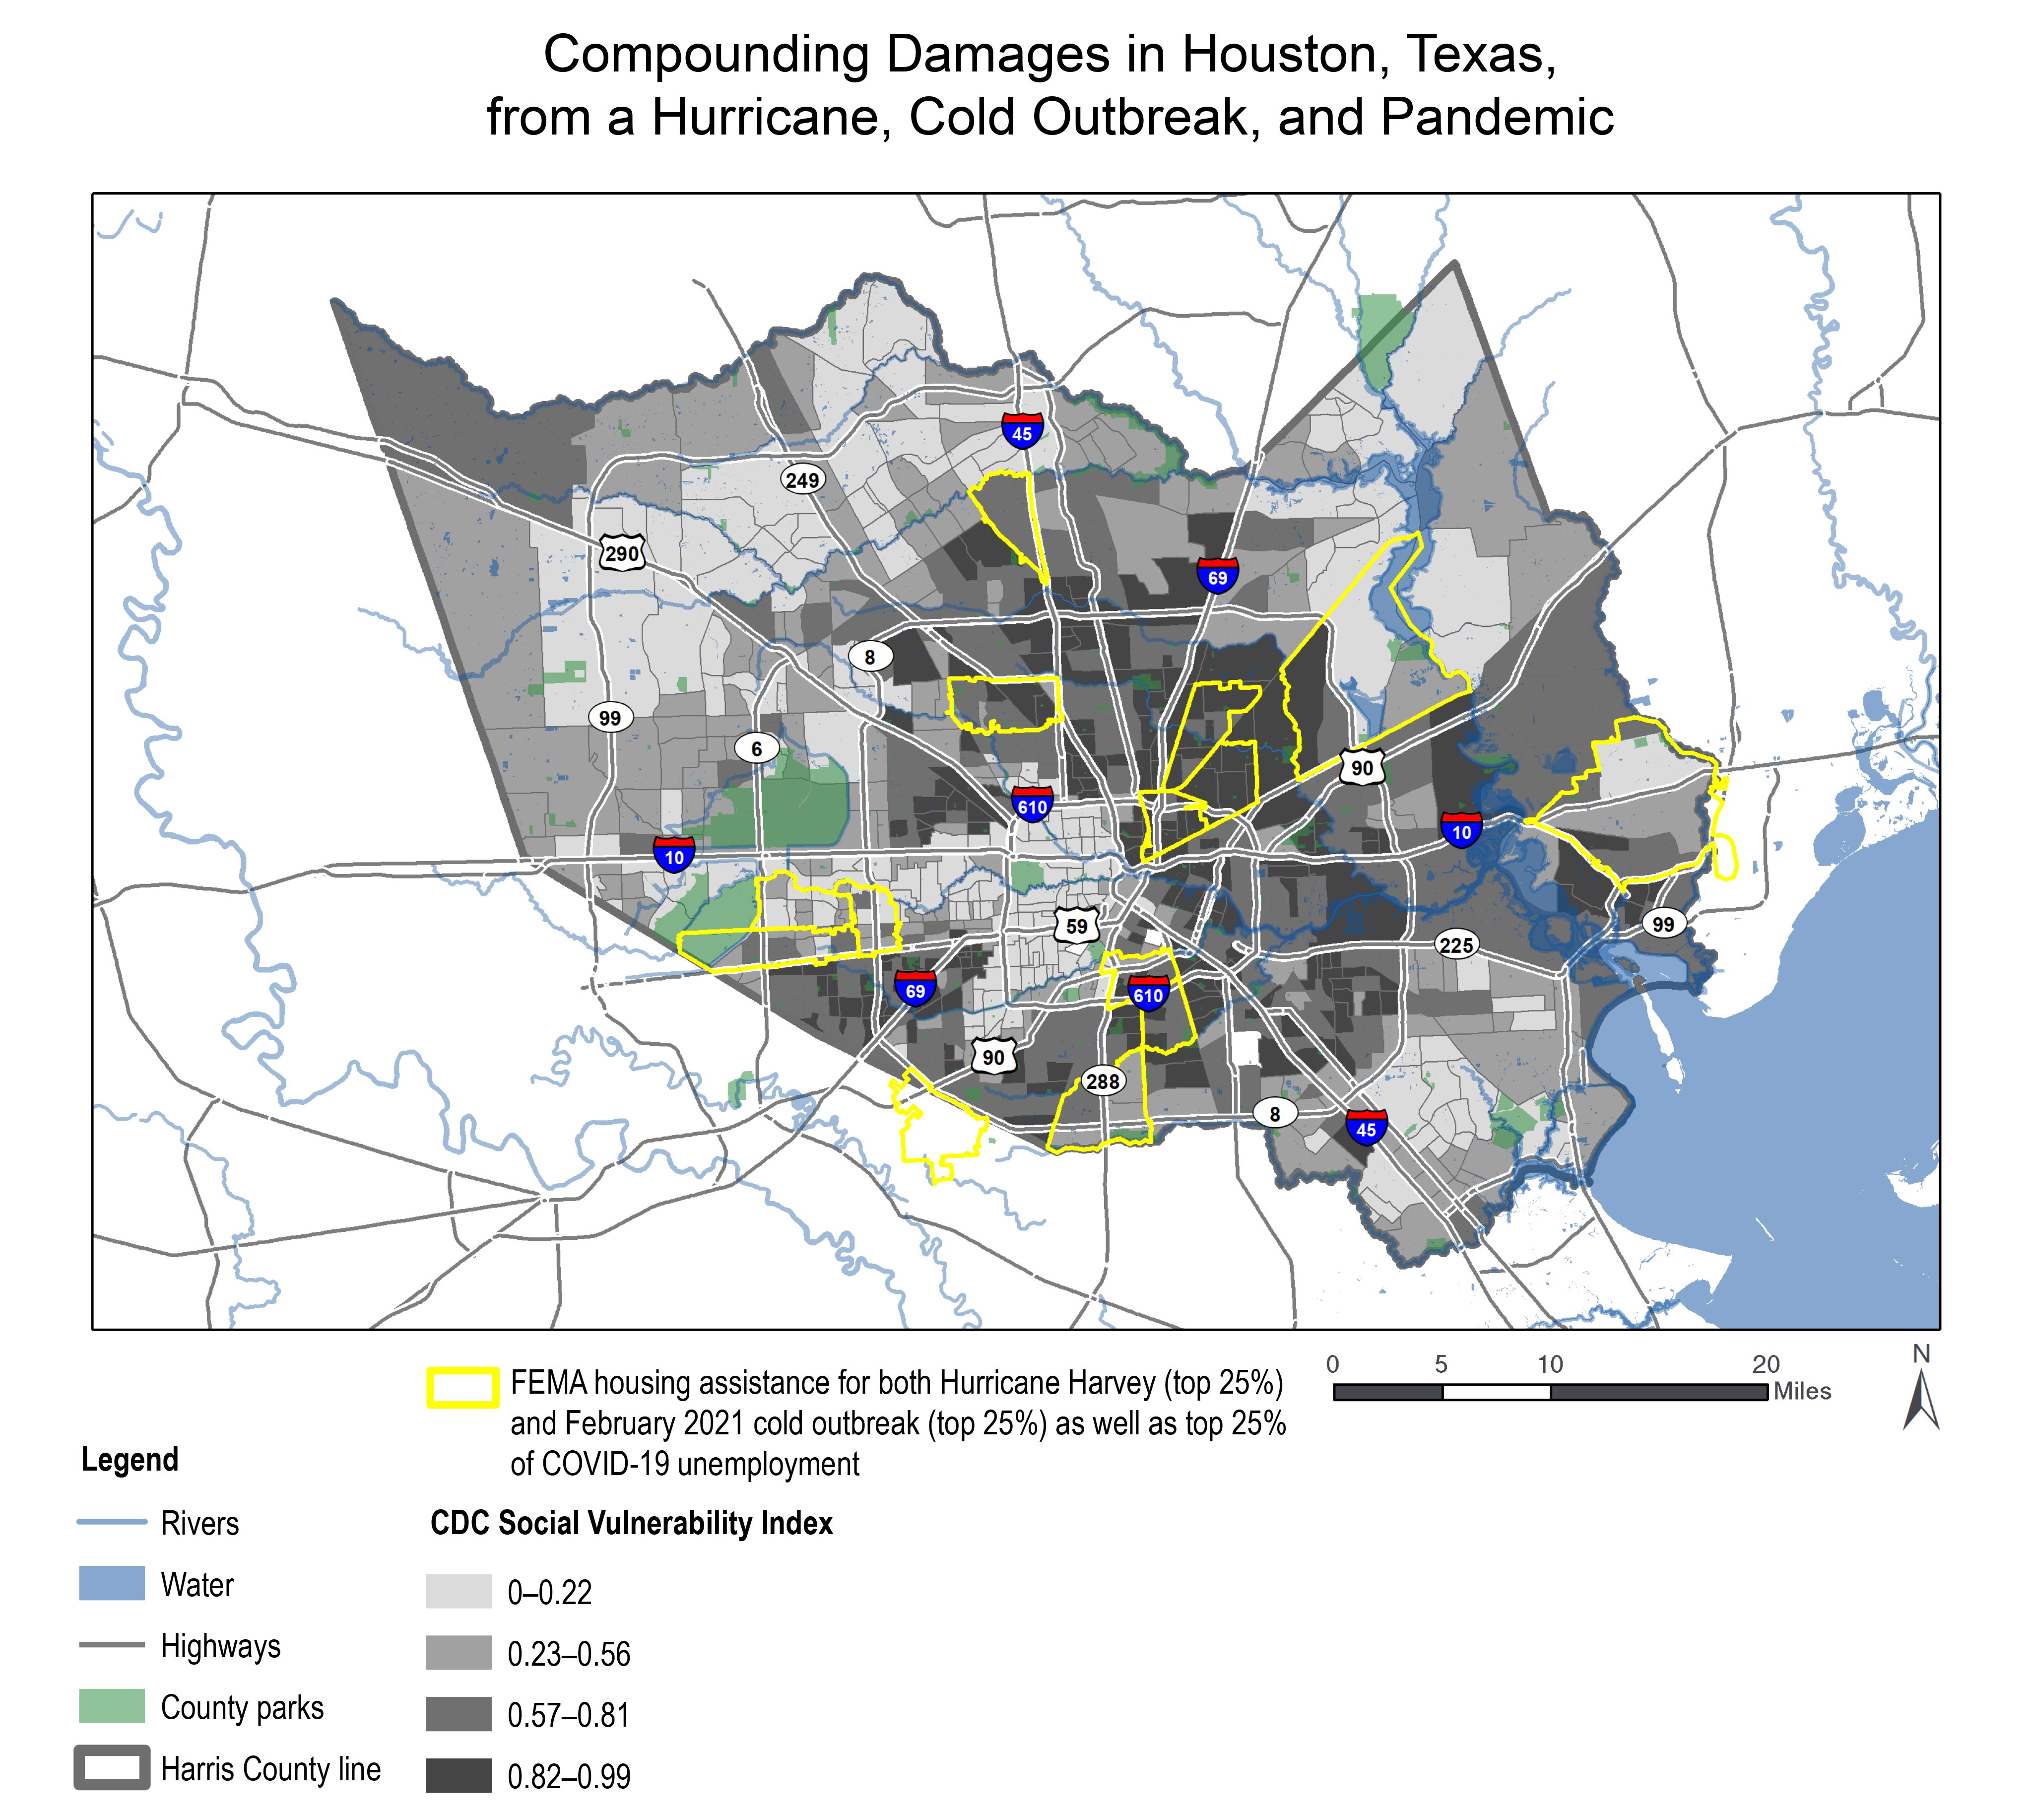 Compounding Damages in Houston, Texas, from a Hurricane, Cold Outbreak, and Pandemic